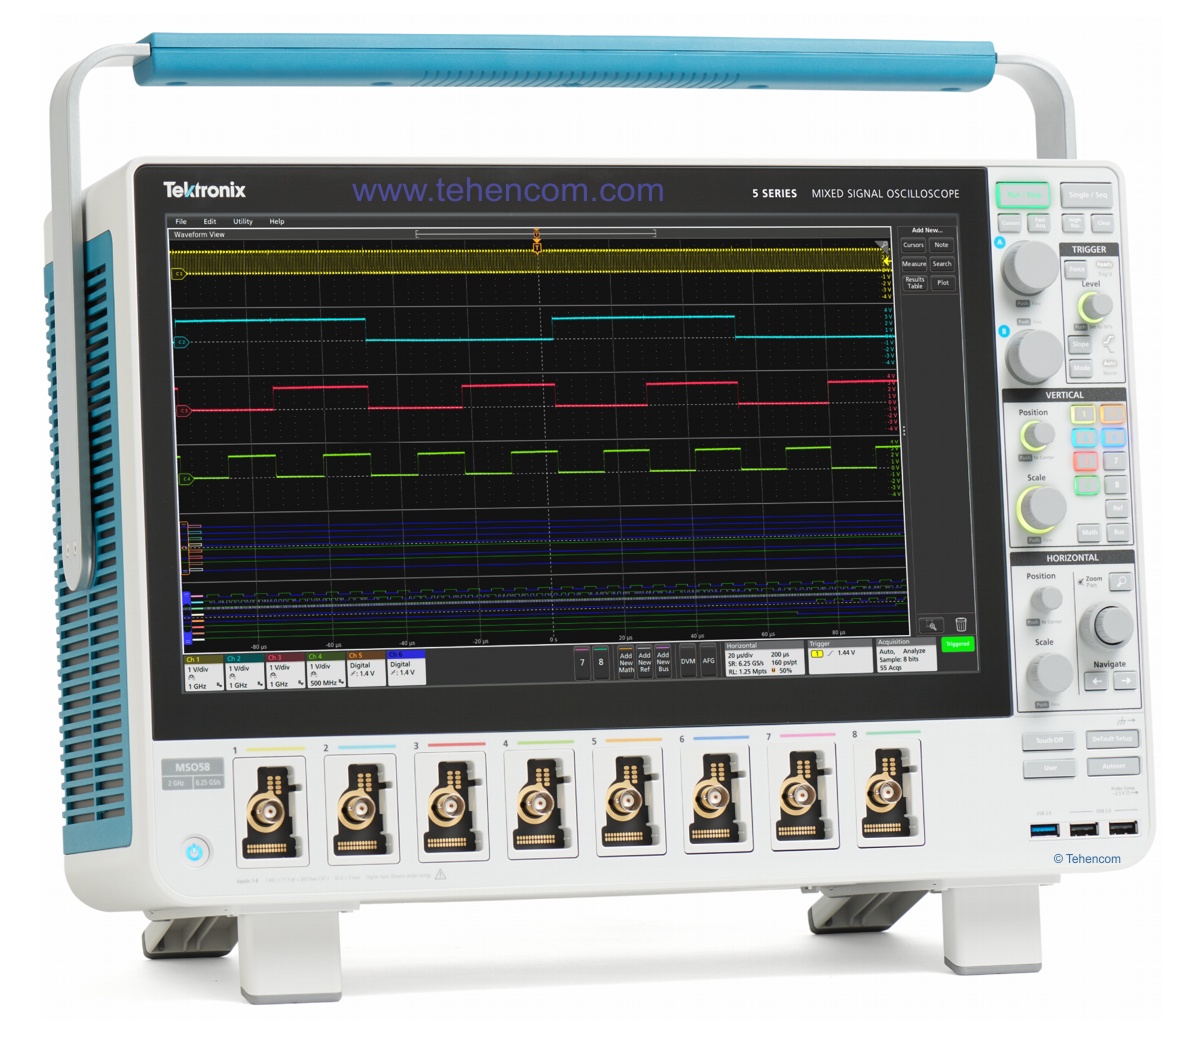 Tektronix MSO5 - the newest and most technologically advanced series